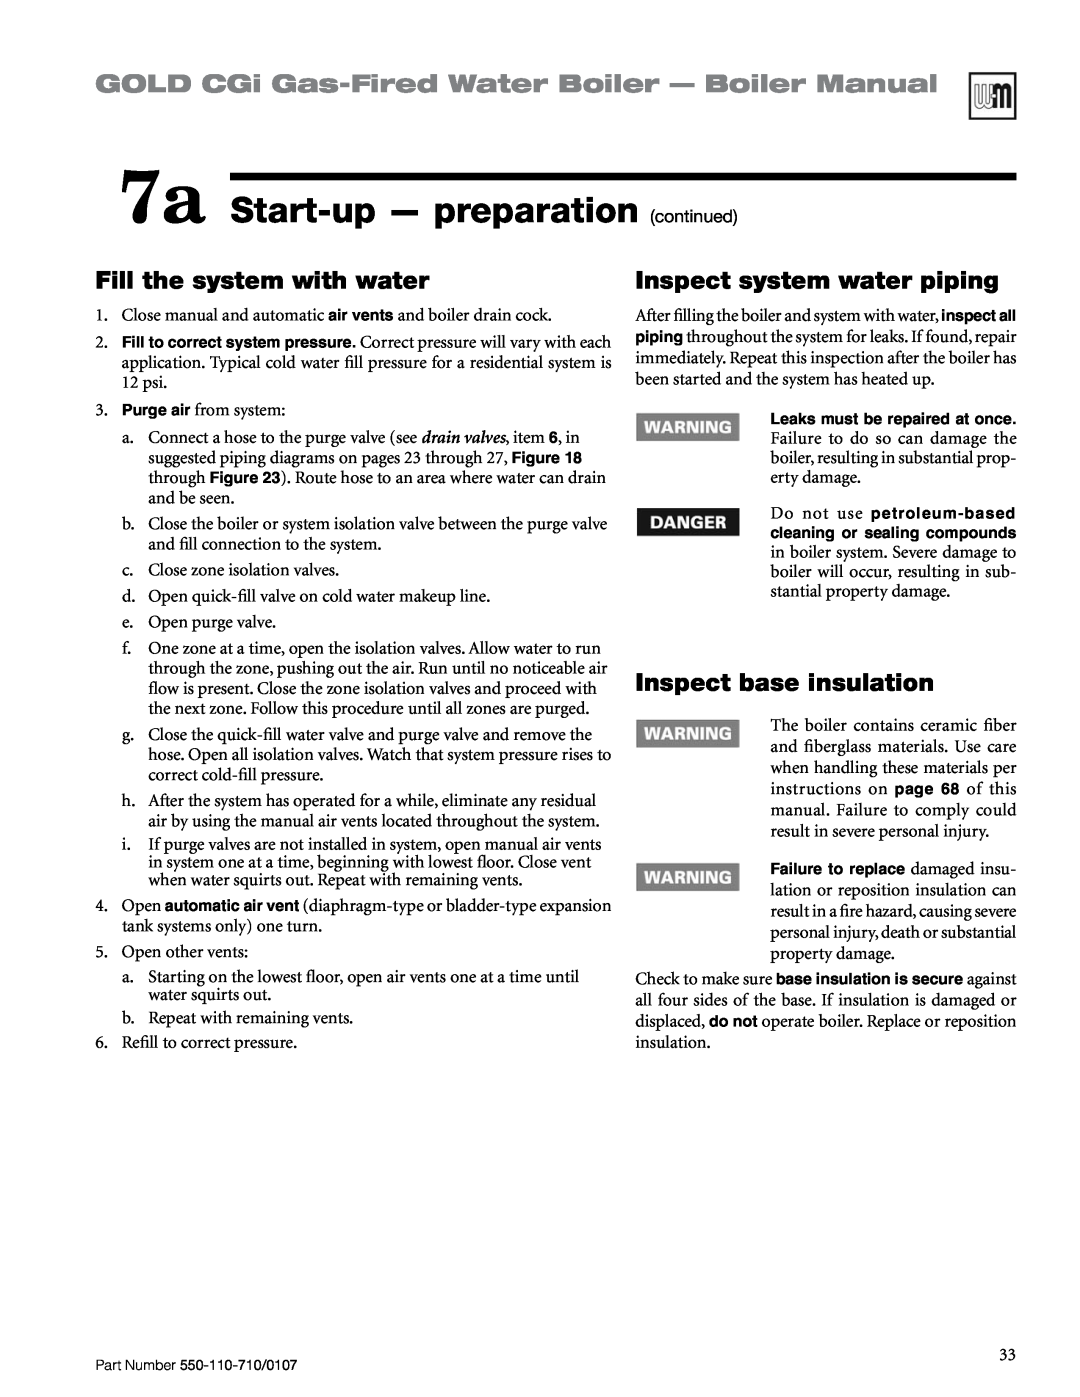 Weil-McLain 550-110-710/0107 manual 7a Start-up— preparation continued, GOLD CGi Gas-FiredWater Boiler — Boiler Manual 